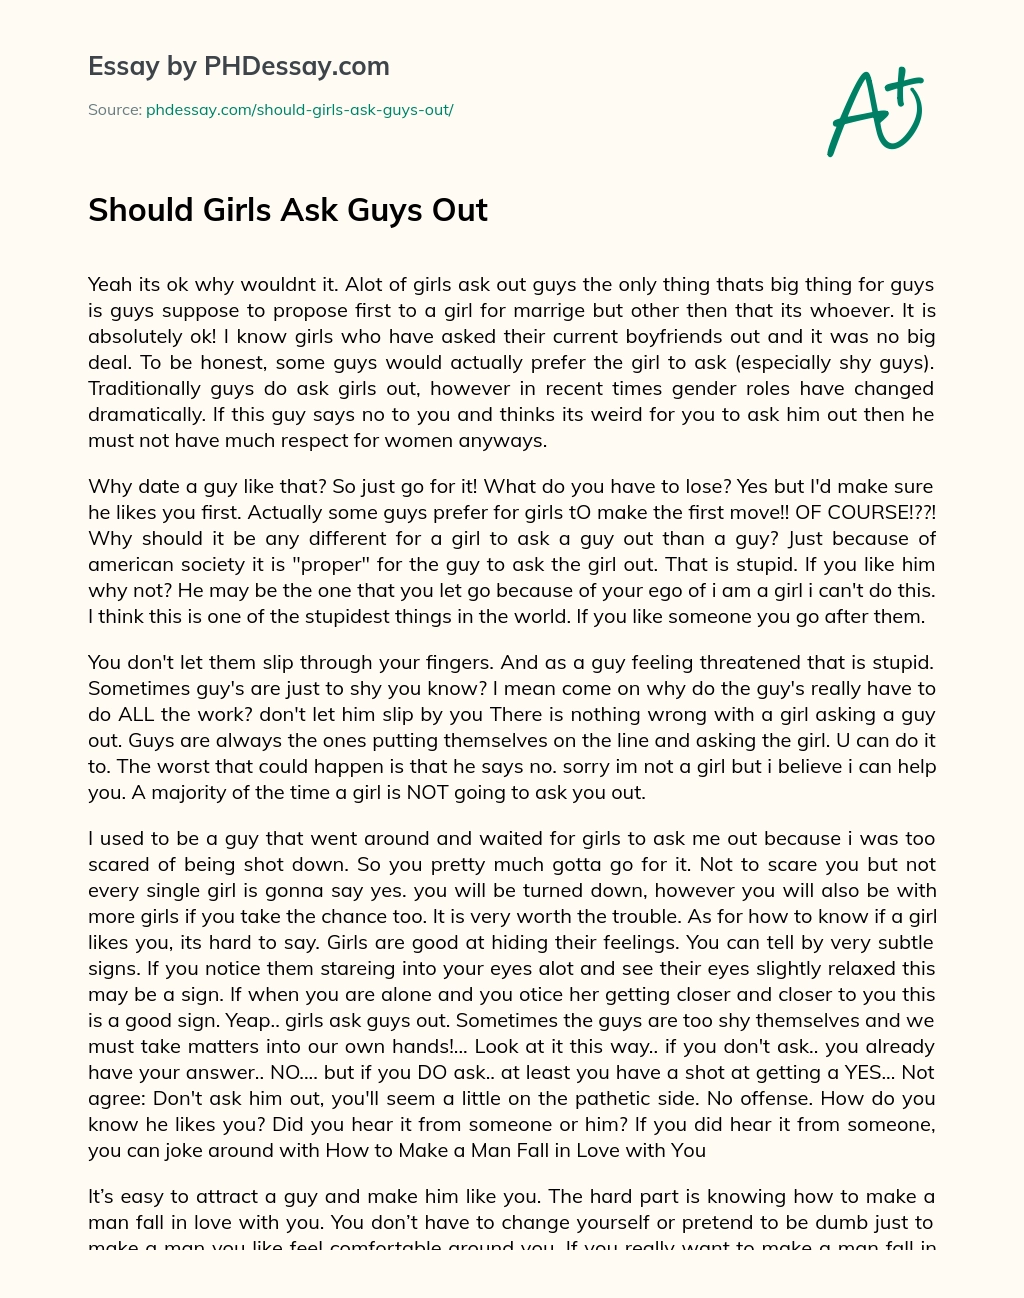 Questions for a girl to ask a guy